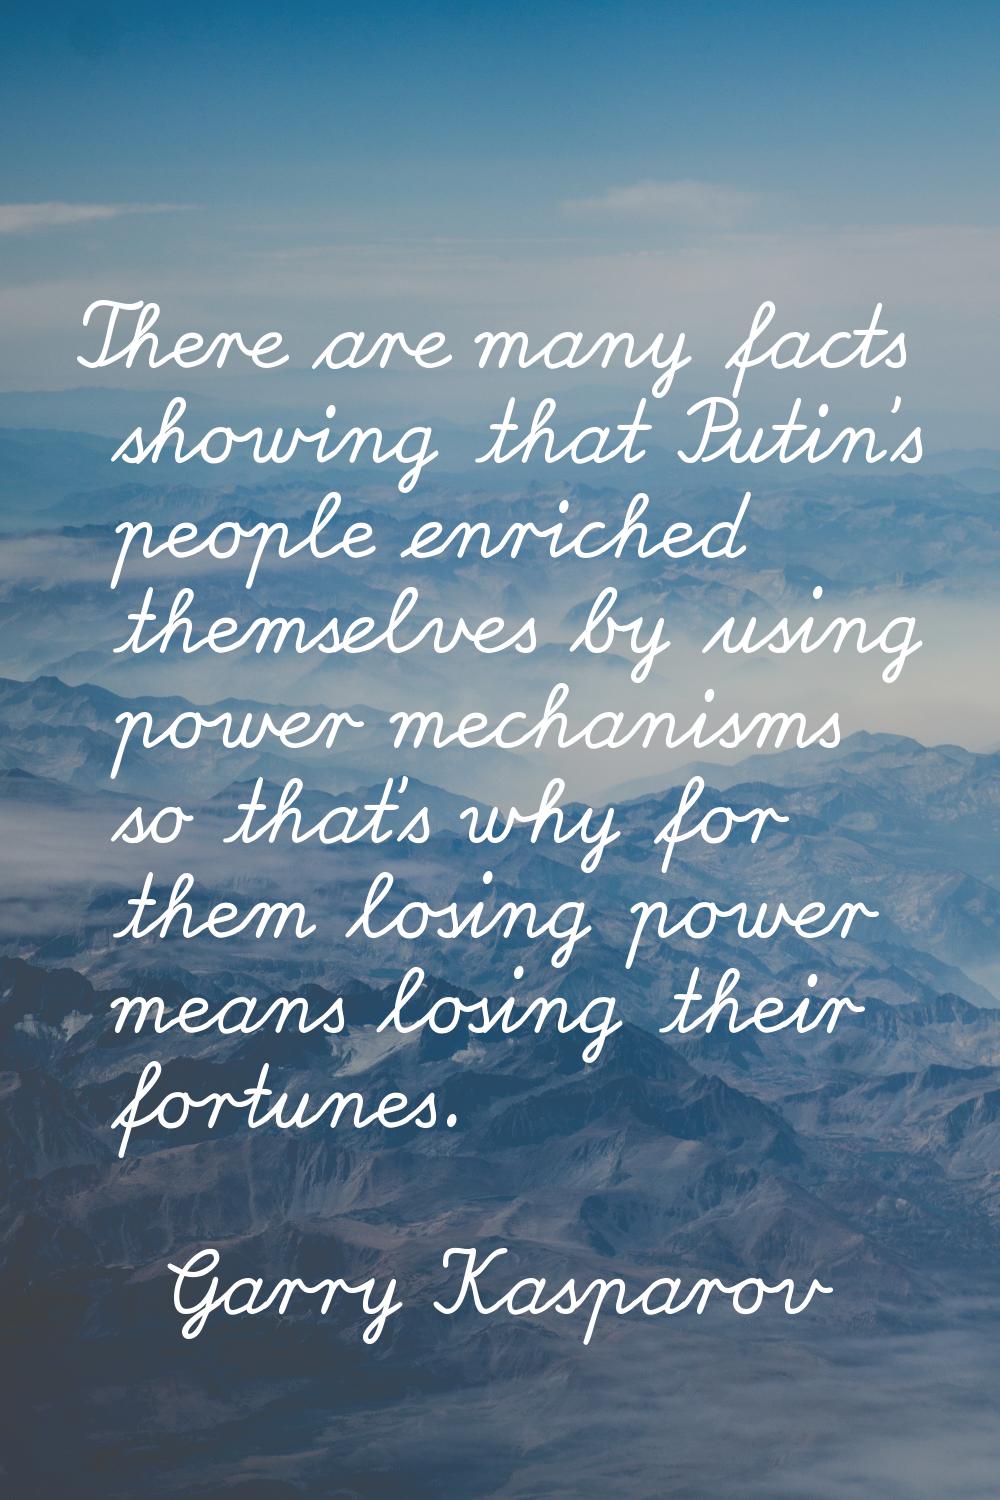 There are many facts showing that Putin's people enriched themselves by using power mechanisms so t